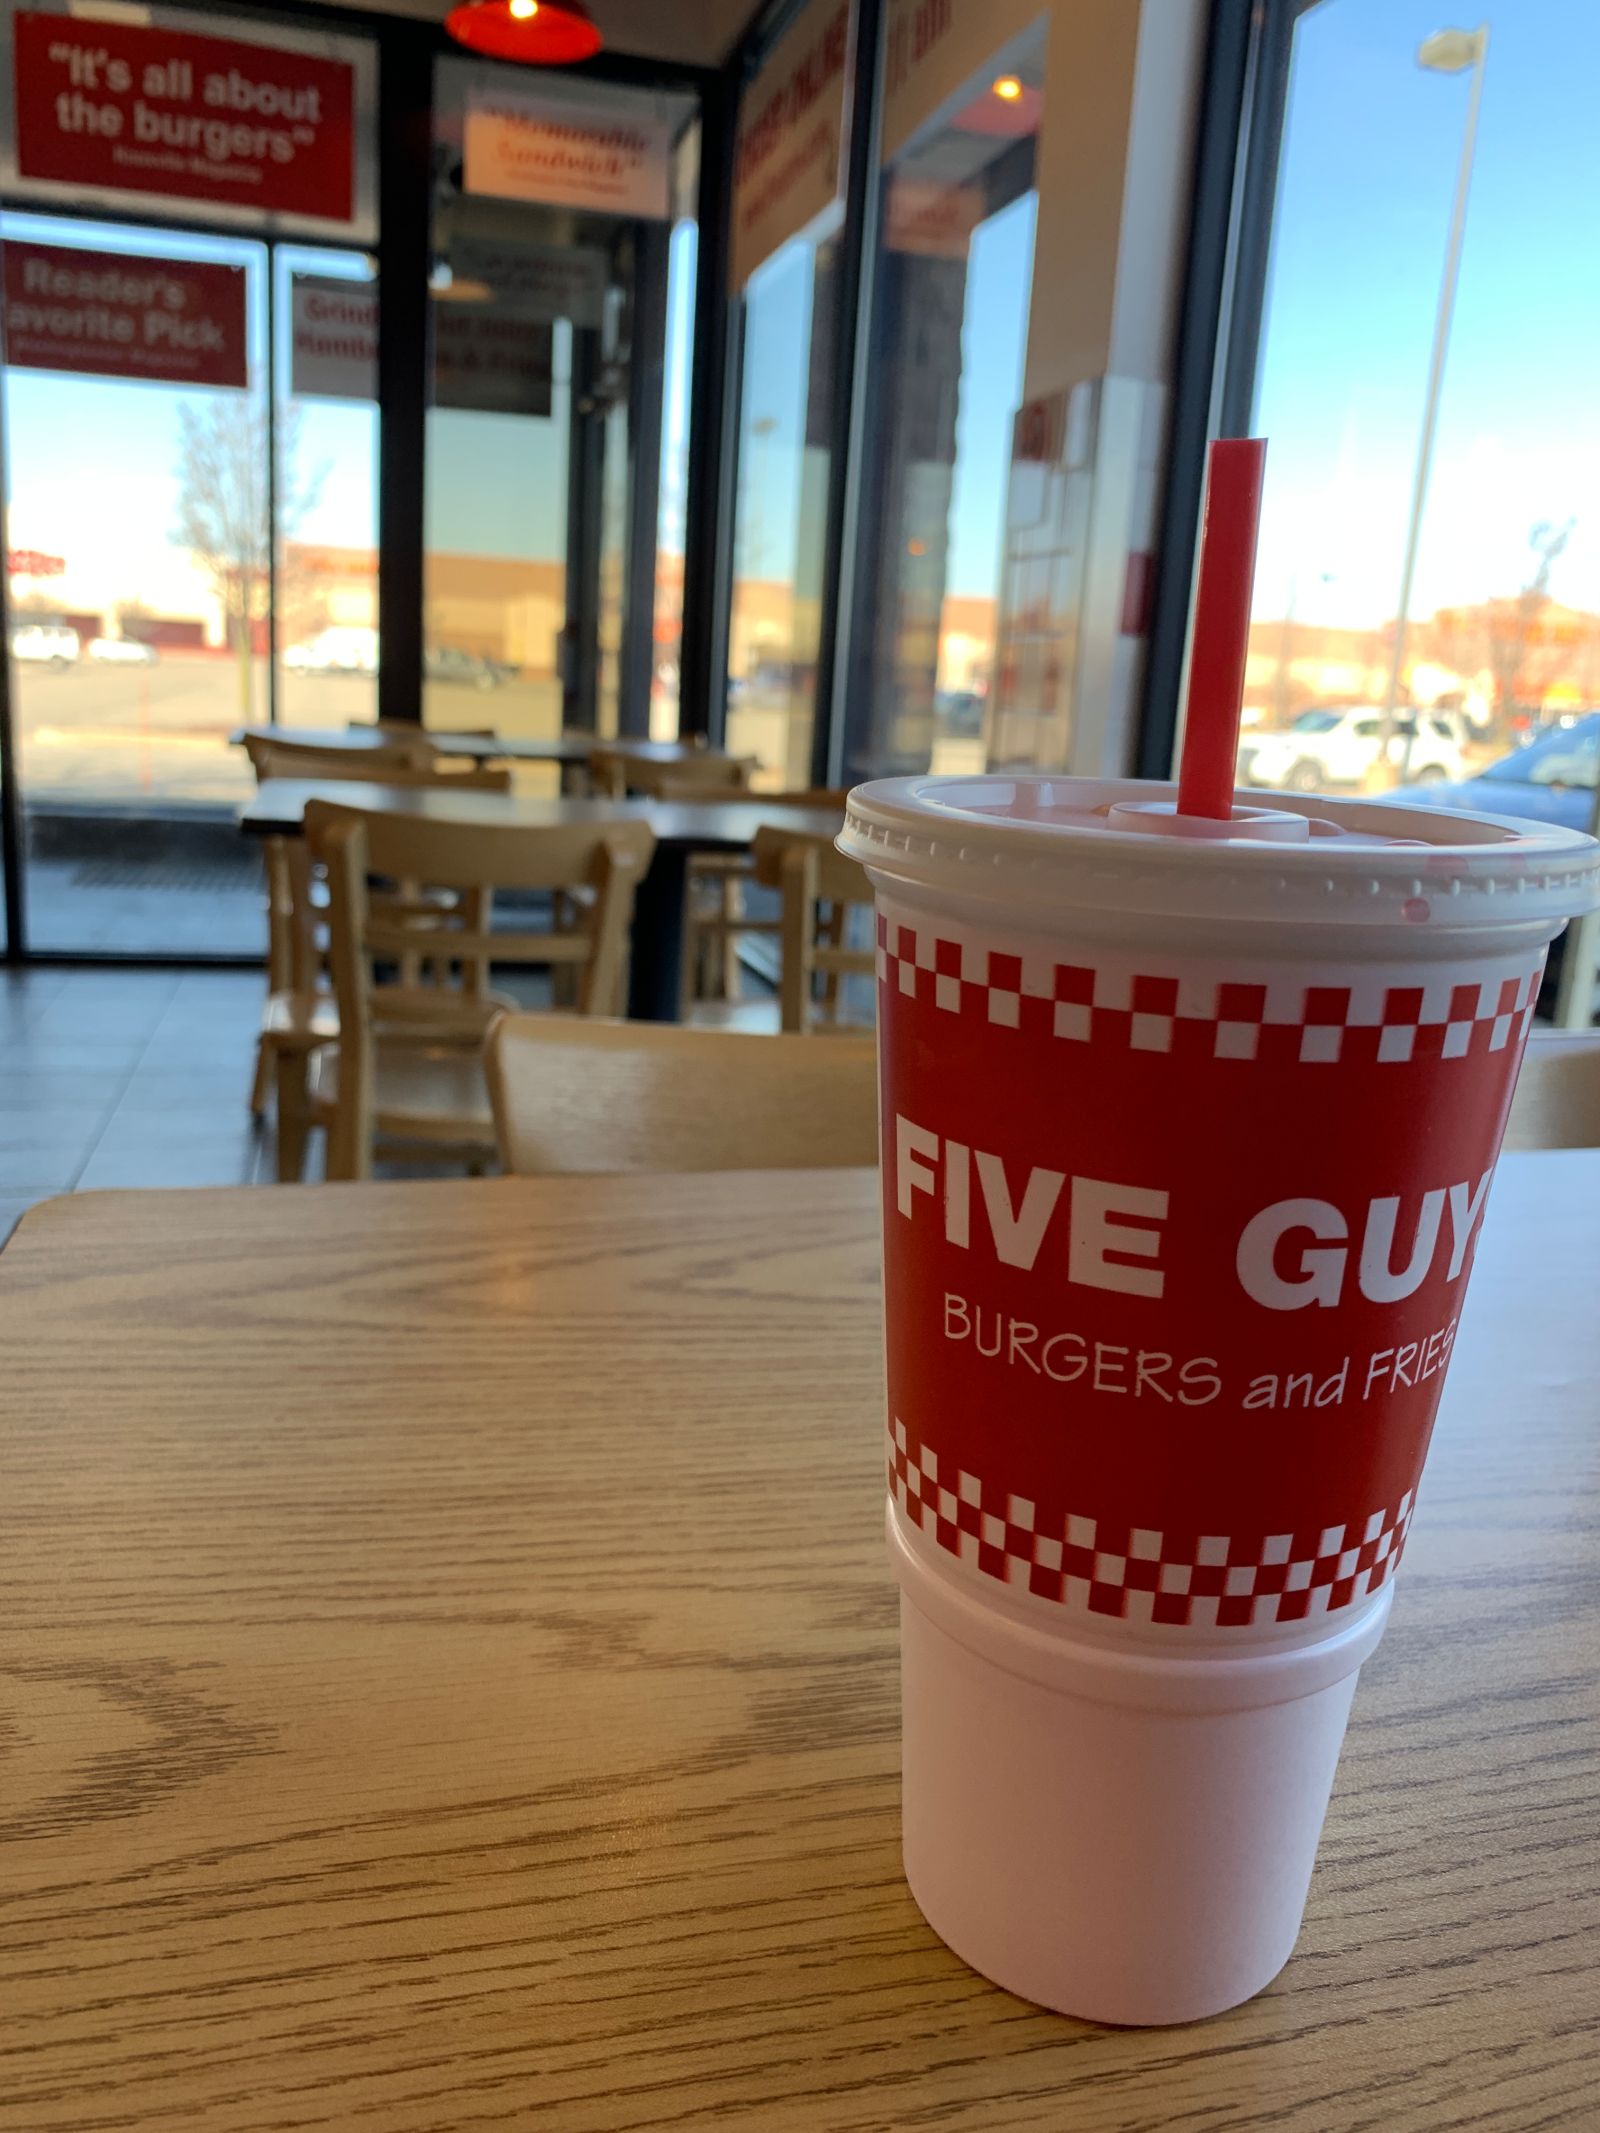 Illustration for article titled Five Guys: First one in the door